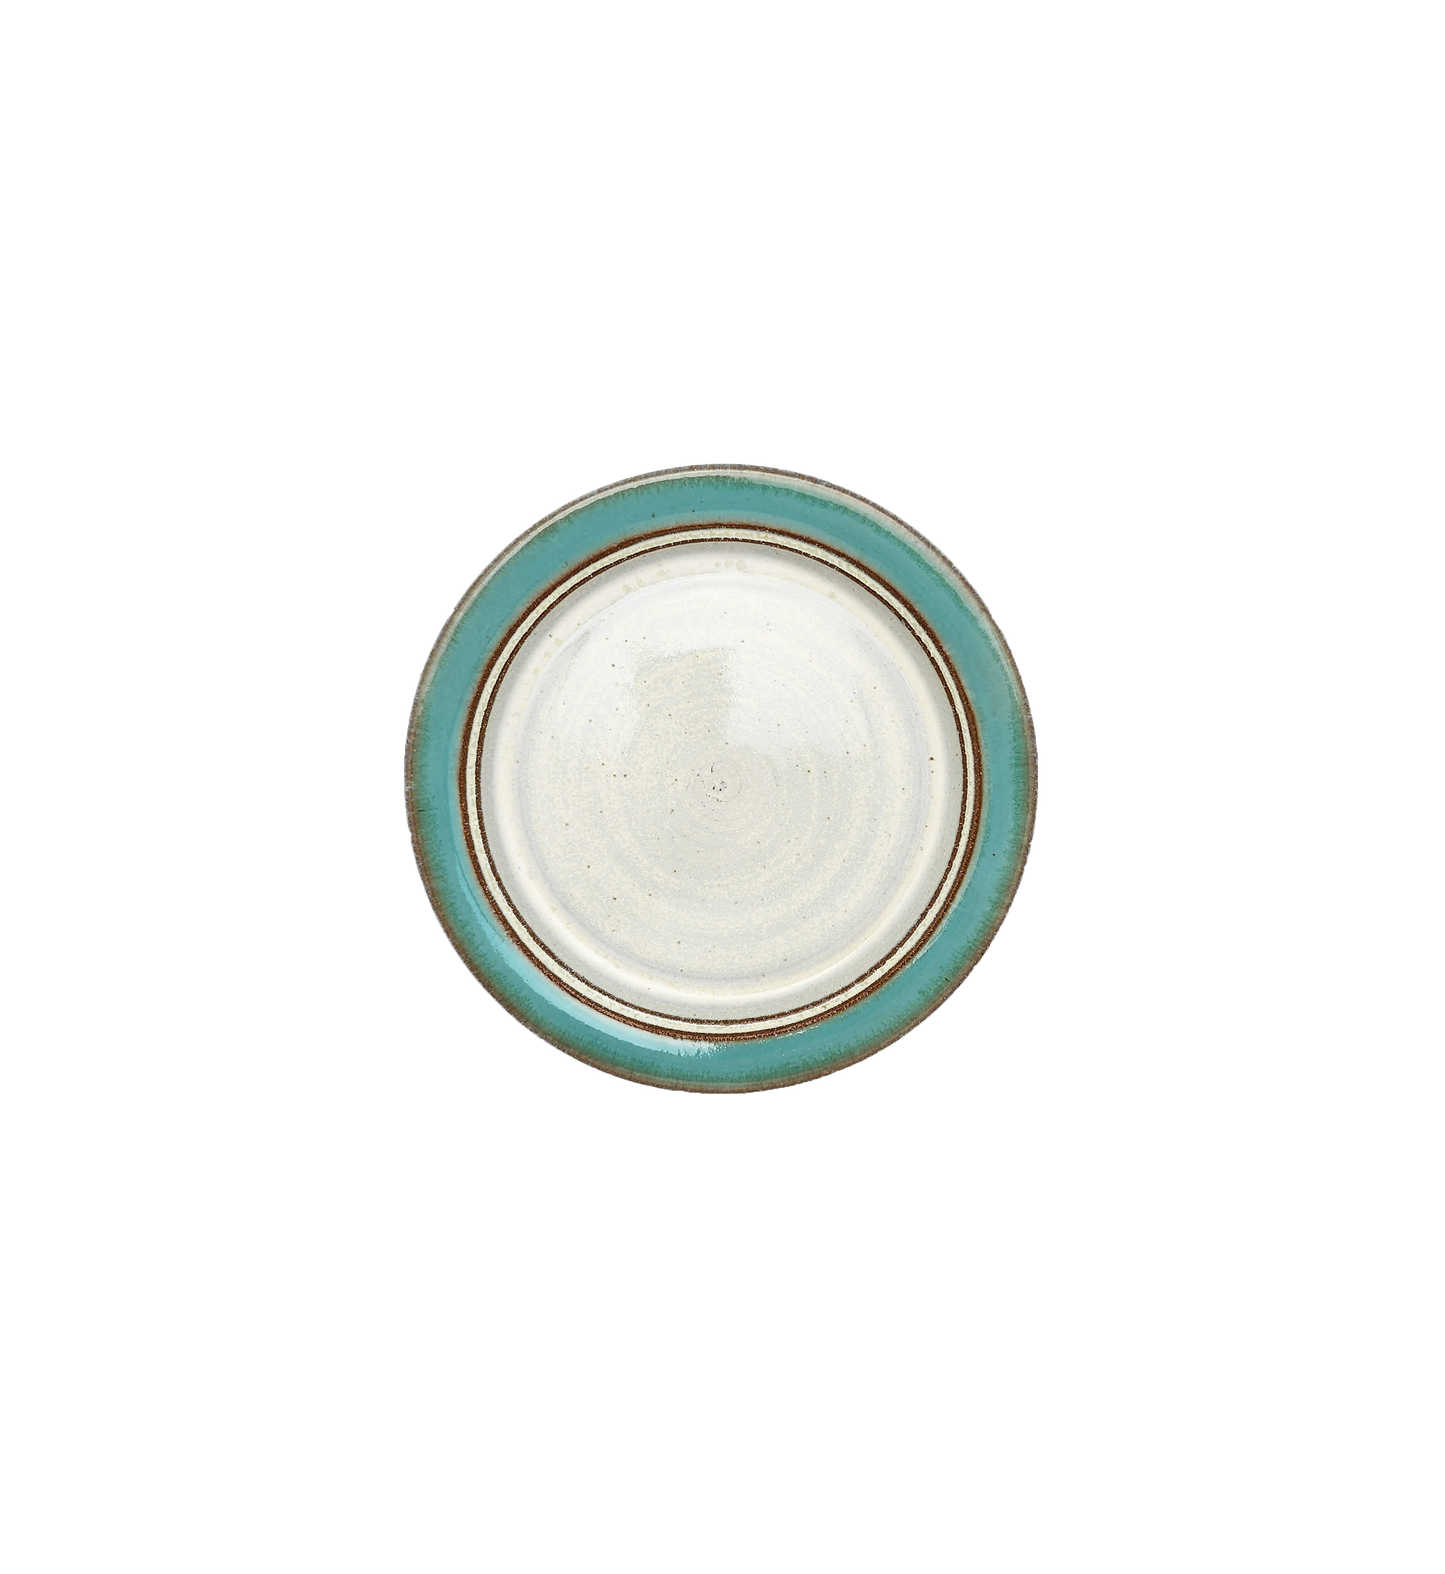 Image Description for Dessert Plate (6.5") in Sky Blue: A dessert plate from Clinton Pottery's Handmade Dinnerware Collection, showcasing a serene and vibrant "Sky Blue" glaze. The 6.5-inch plate exhibits a glossy finish with hues reminiscent of endless blue horizons. Its petite size is perfect for serving delightful desserts or small treats with a touch of tranquil charm.